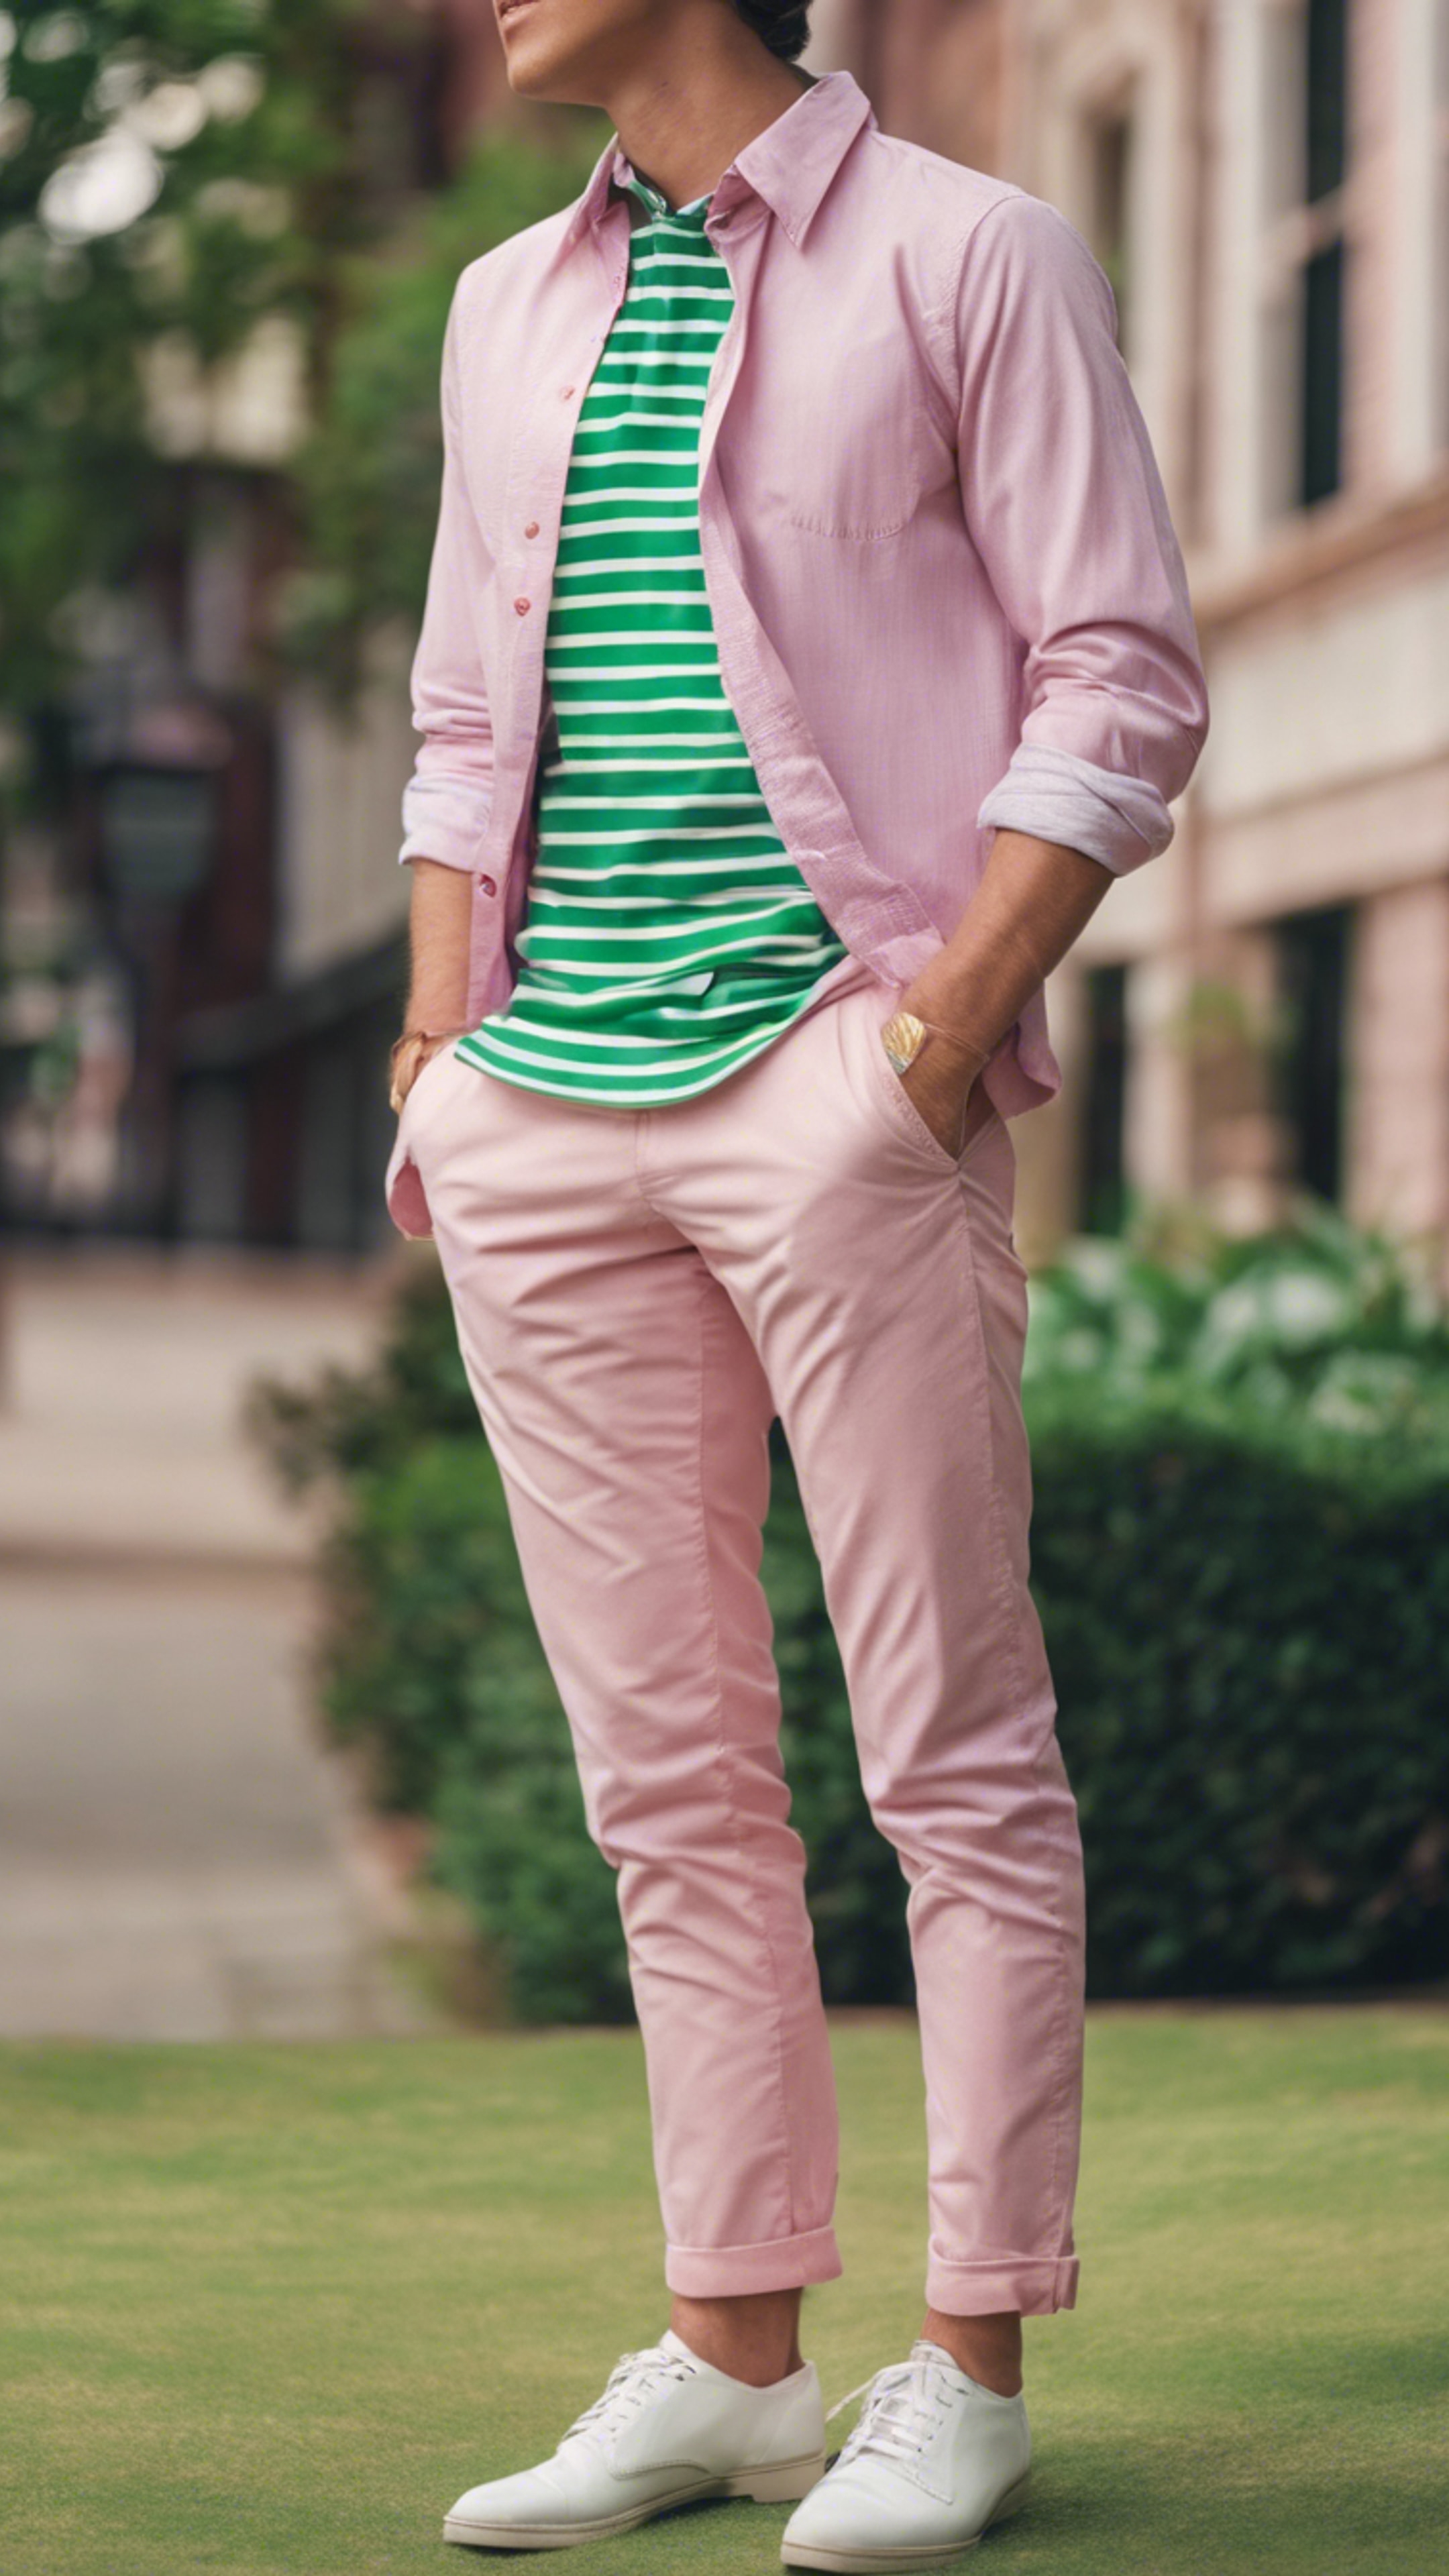 A classic preppy outfit in pink chinos with a green striped Oxford shirt. ផ្ទាំង​រូបភាព[7b2809c9502f40299443]